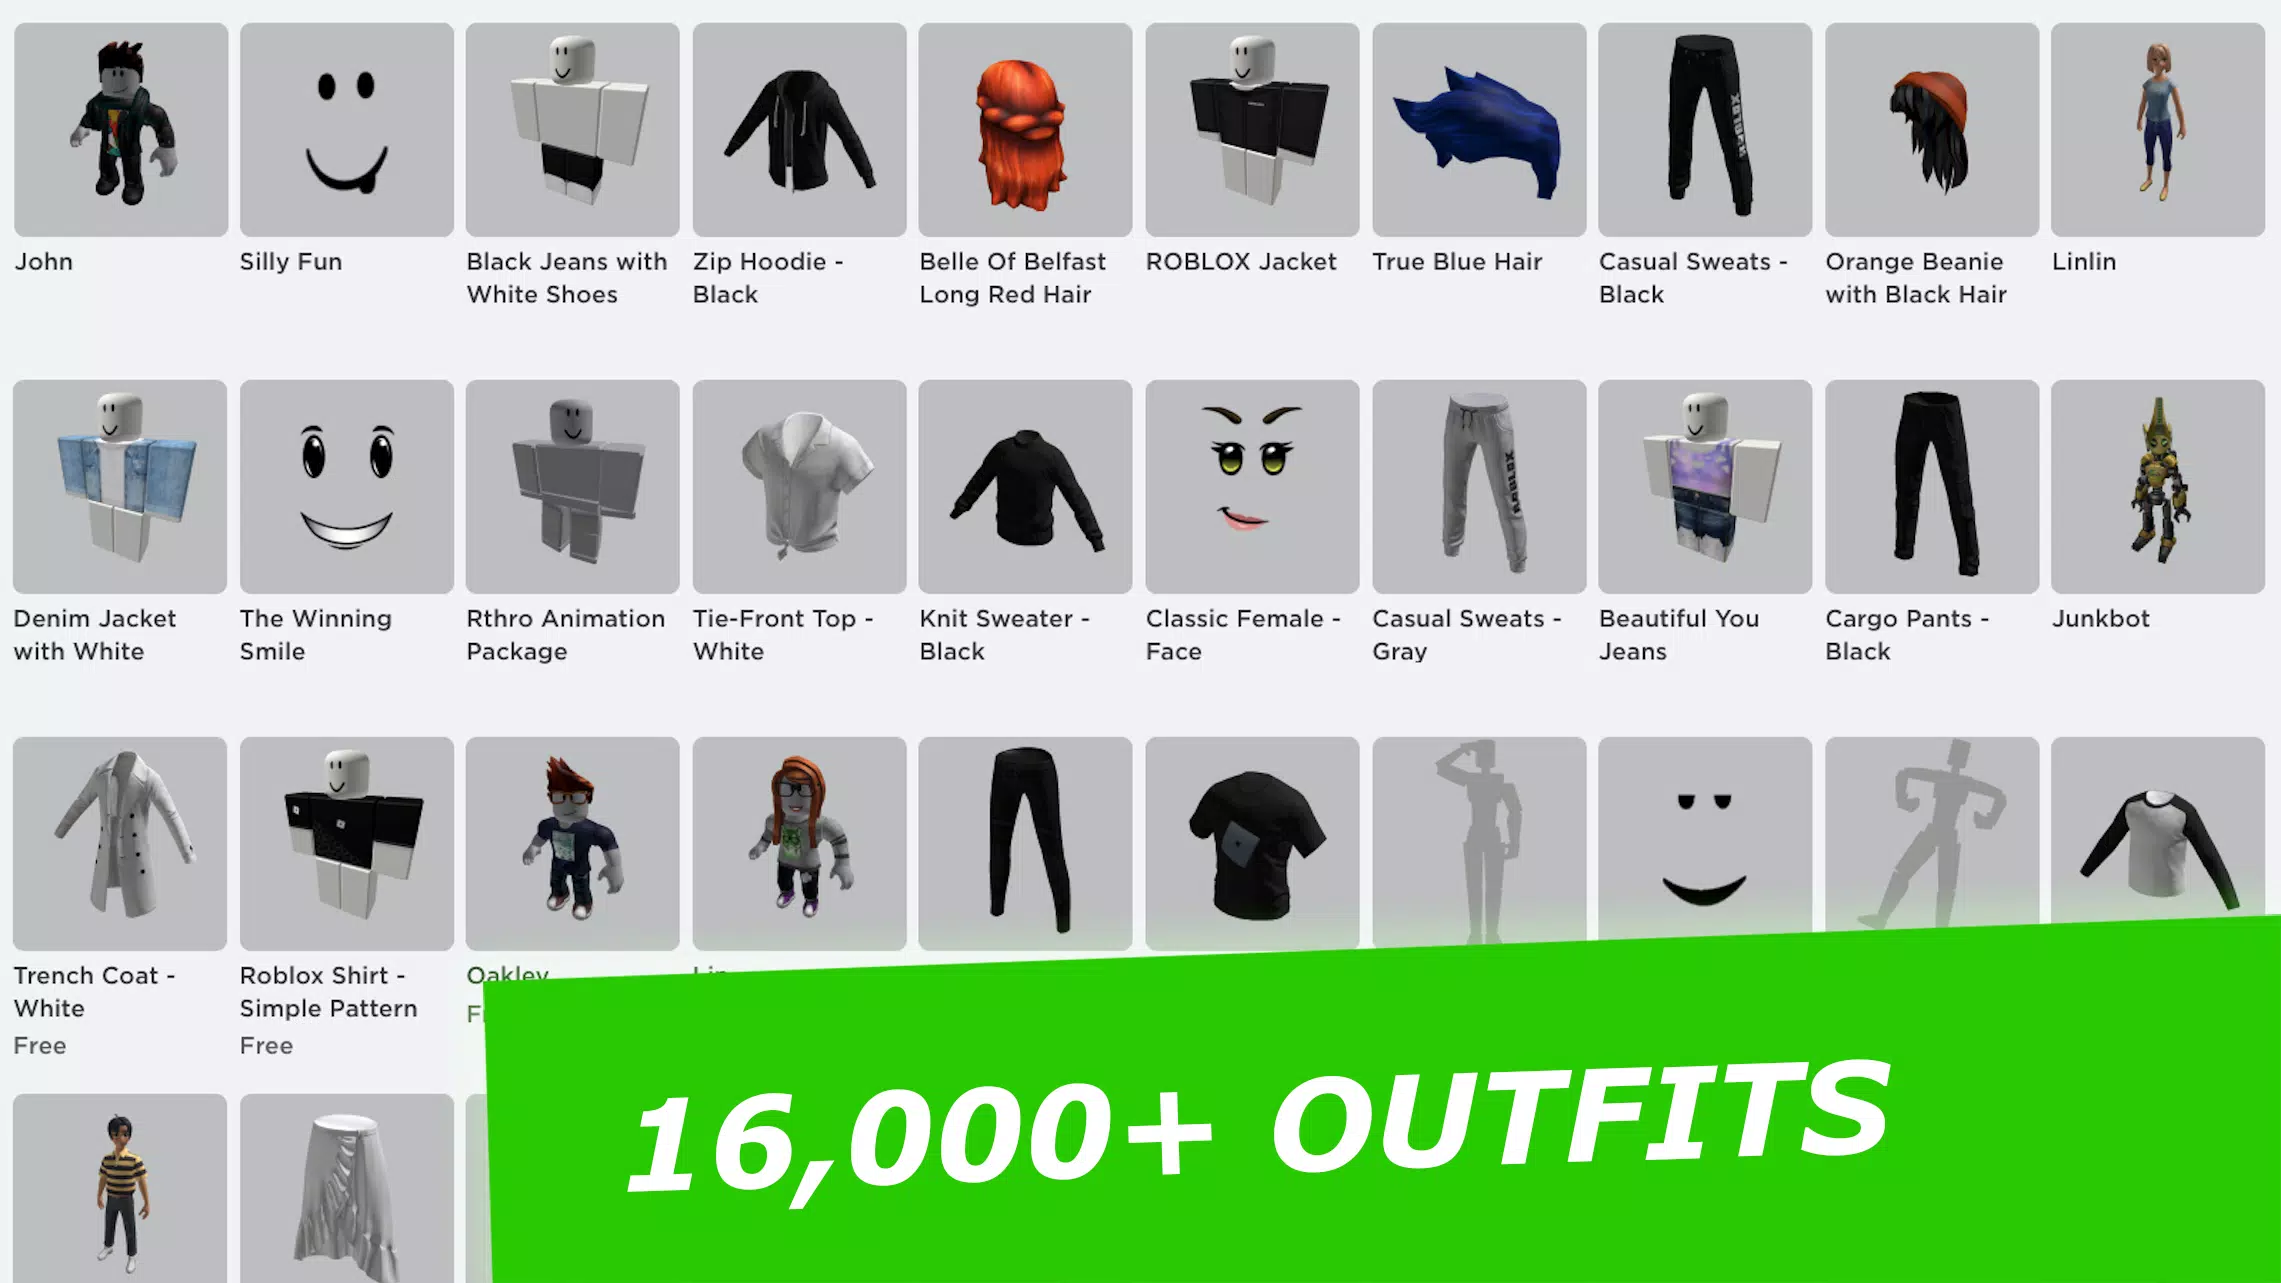 Download SHIRTS-MASTER for Roblox Free for Android - SHIRTS-MASTER for Roblox  APK Download 